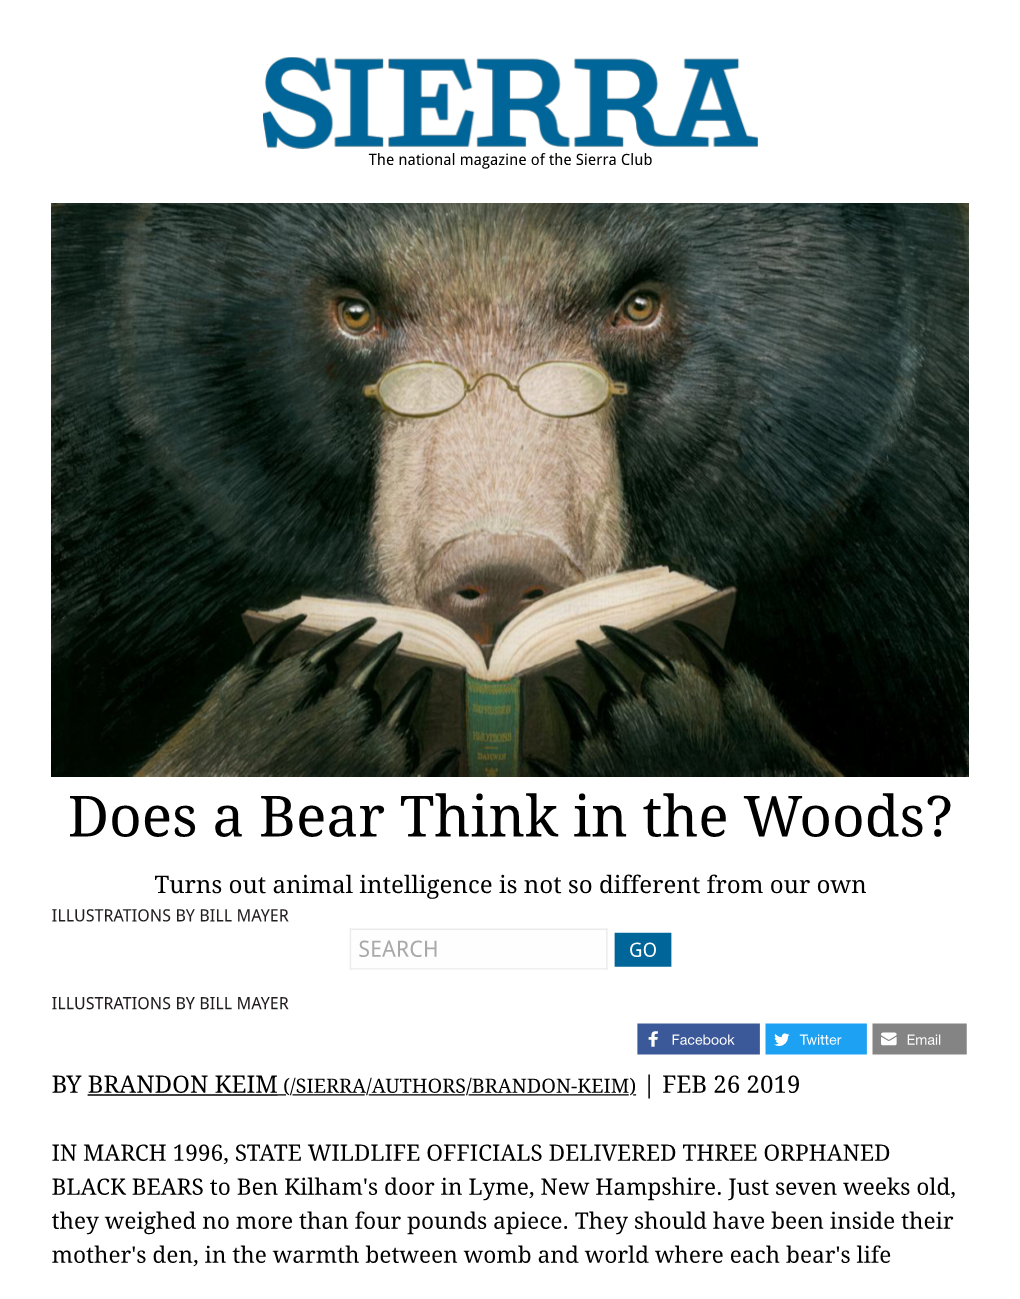 Does a Bear Think in the Woods?